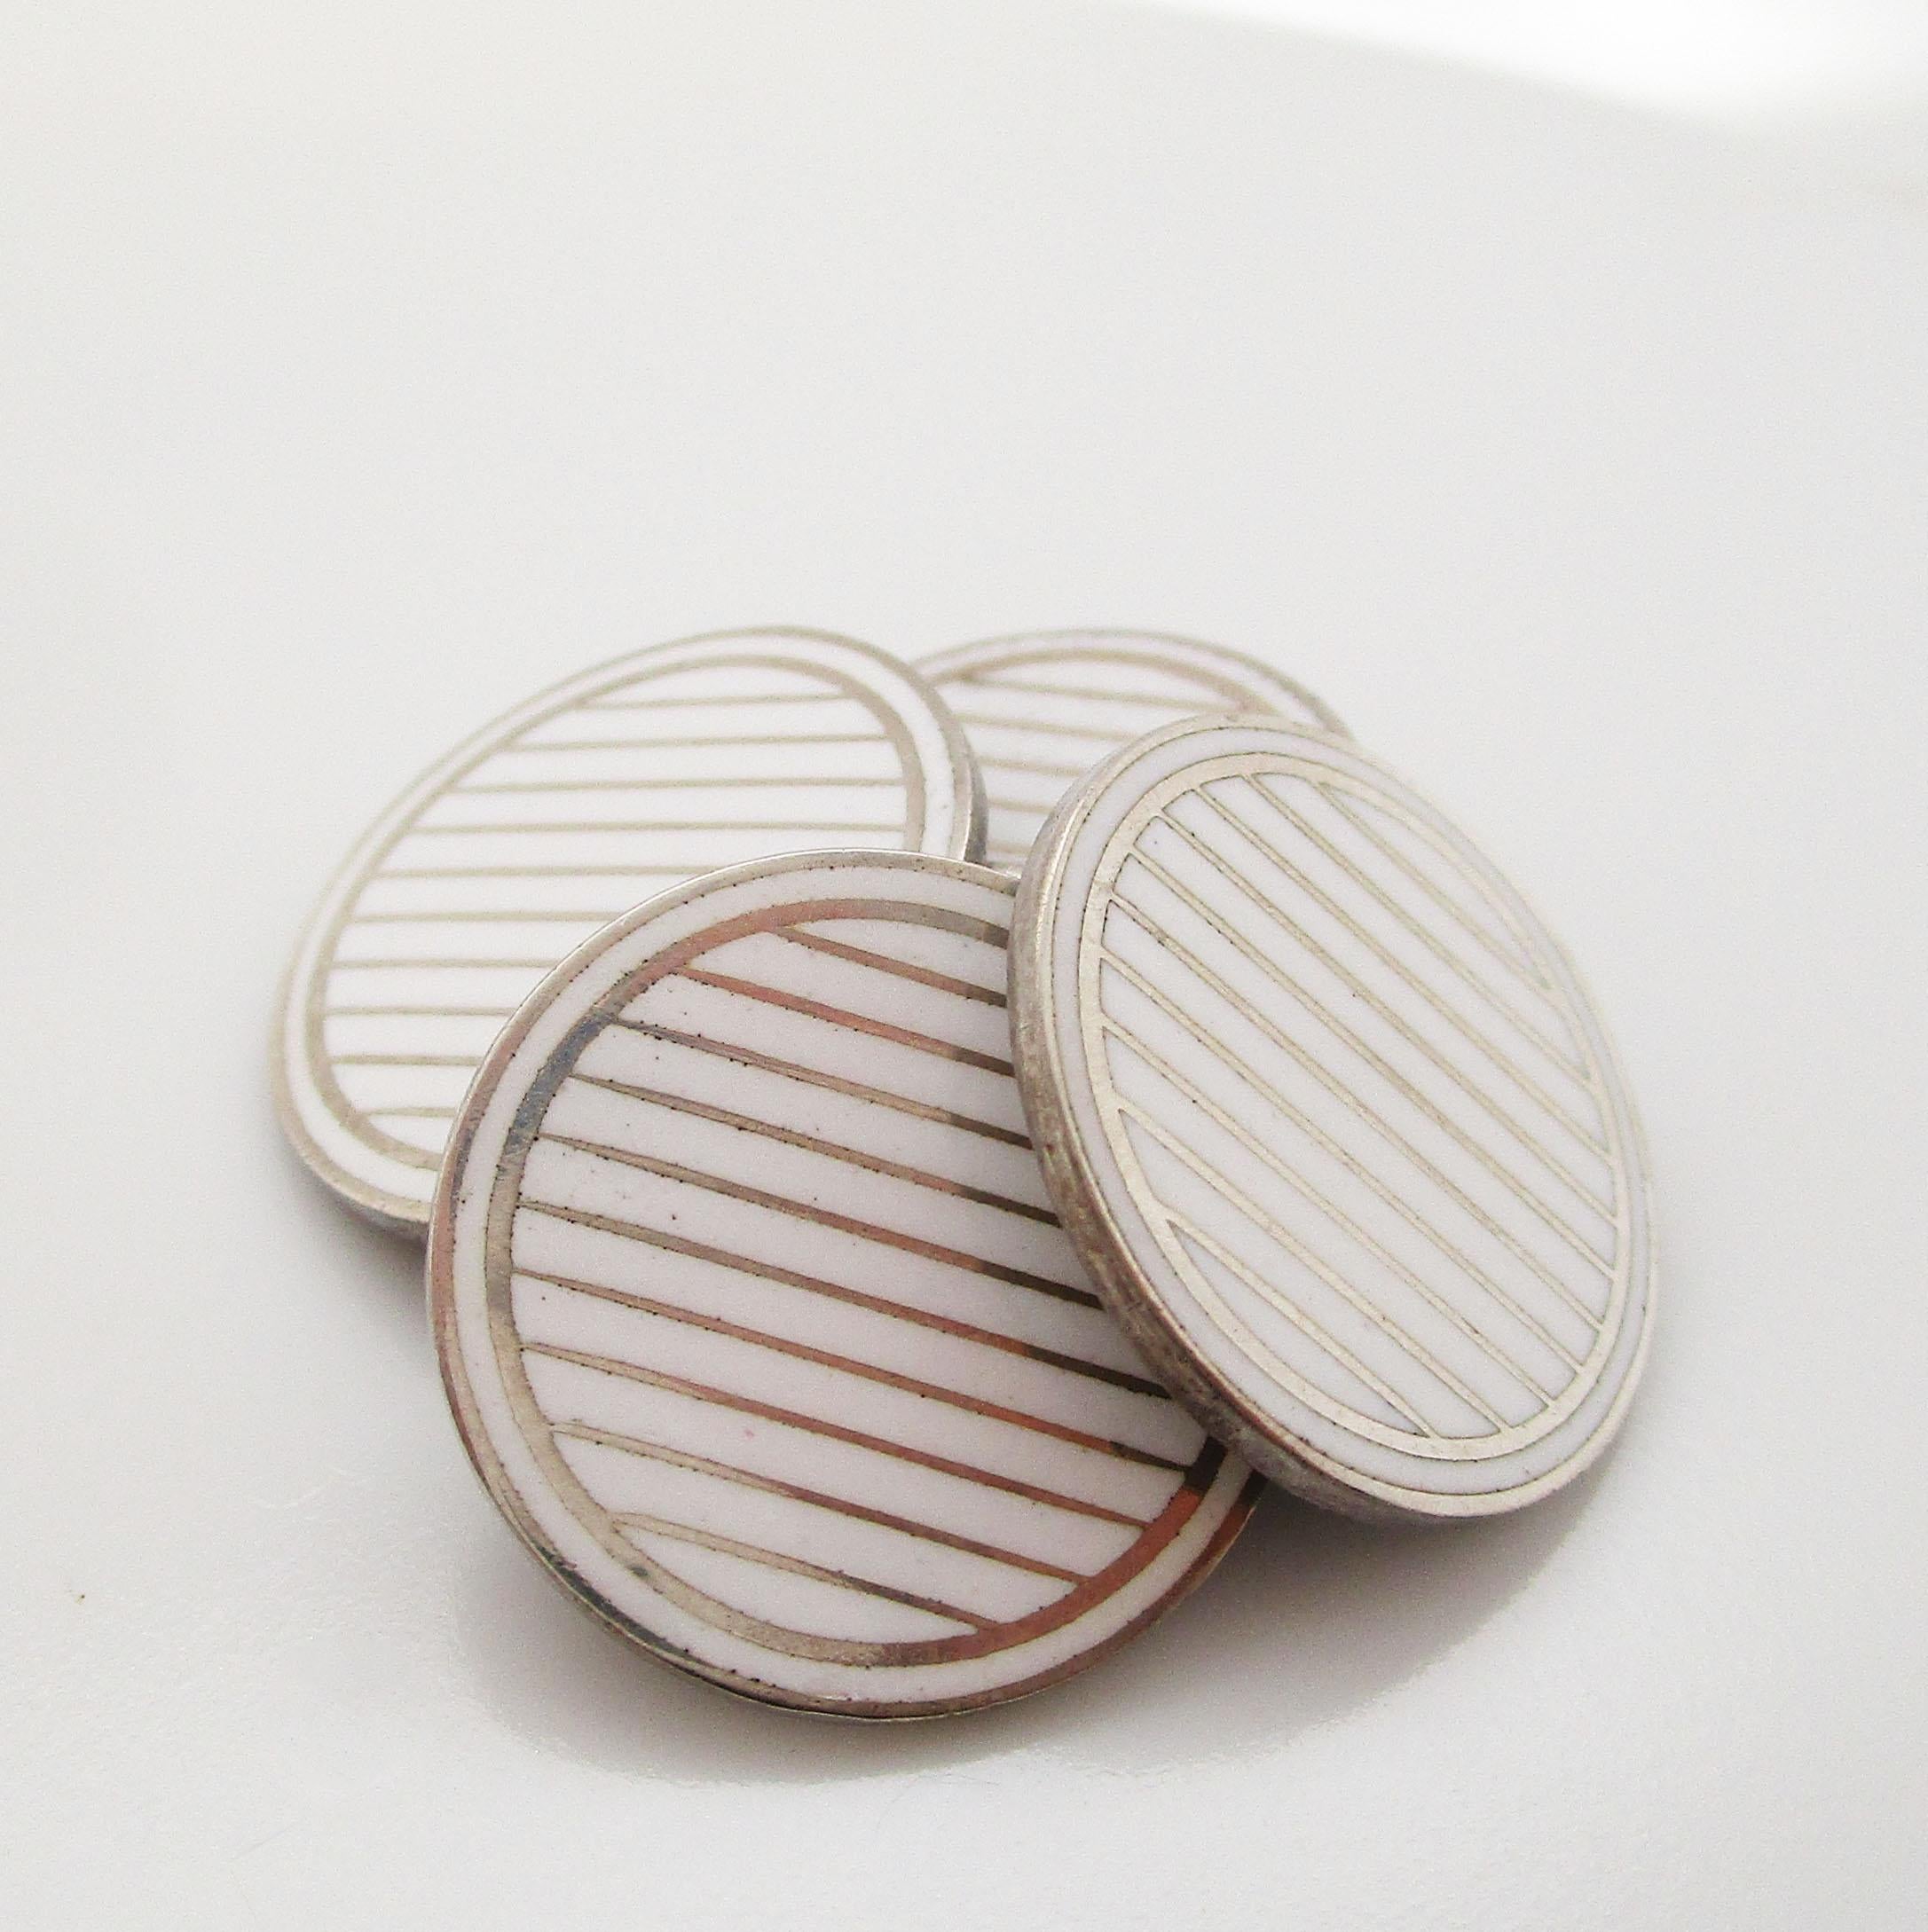 This fantastic set of Art Deco cufflinks is from 1915 and has a bold white striped panel that is the picture of Deco elegance. The cufflinks feature round oversized panels framed with a single white border filled by rows of white stripes. The enamel